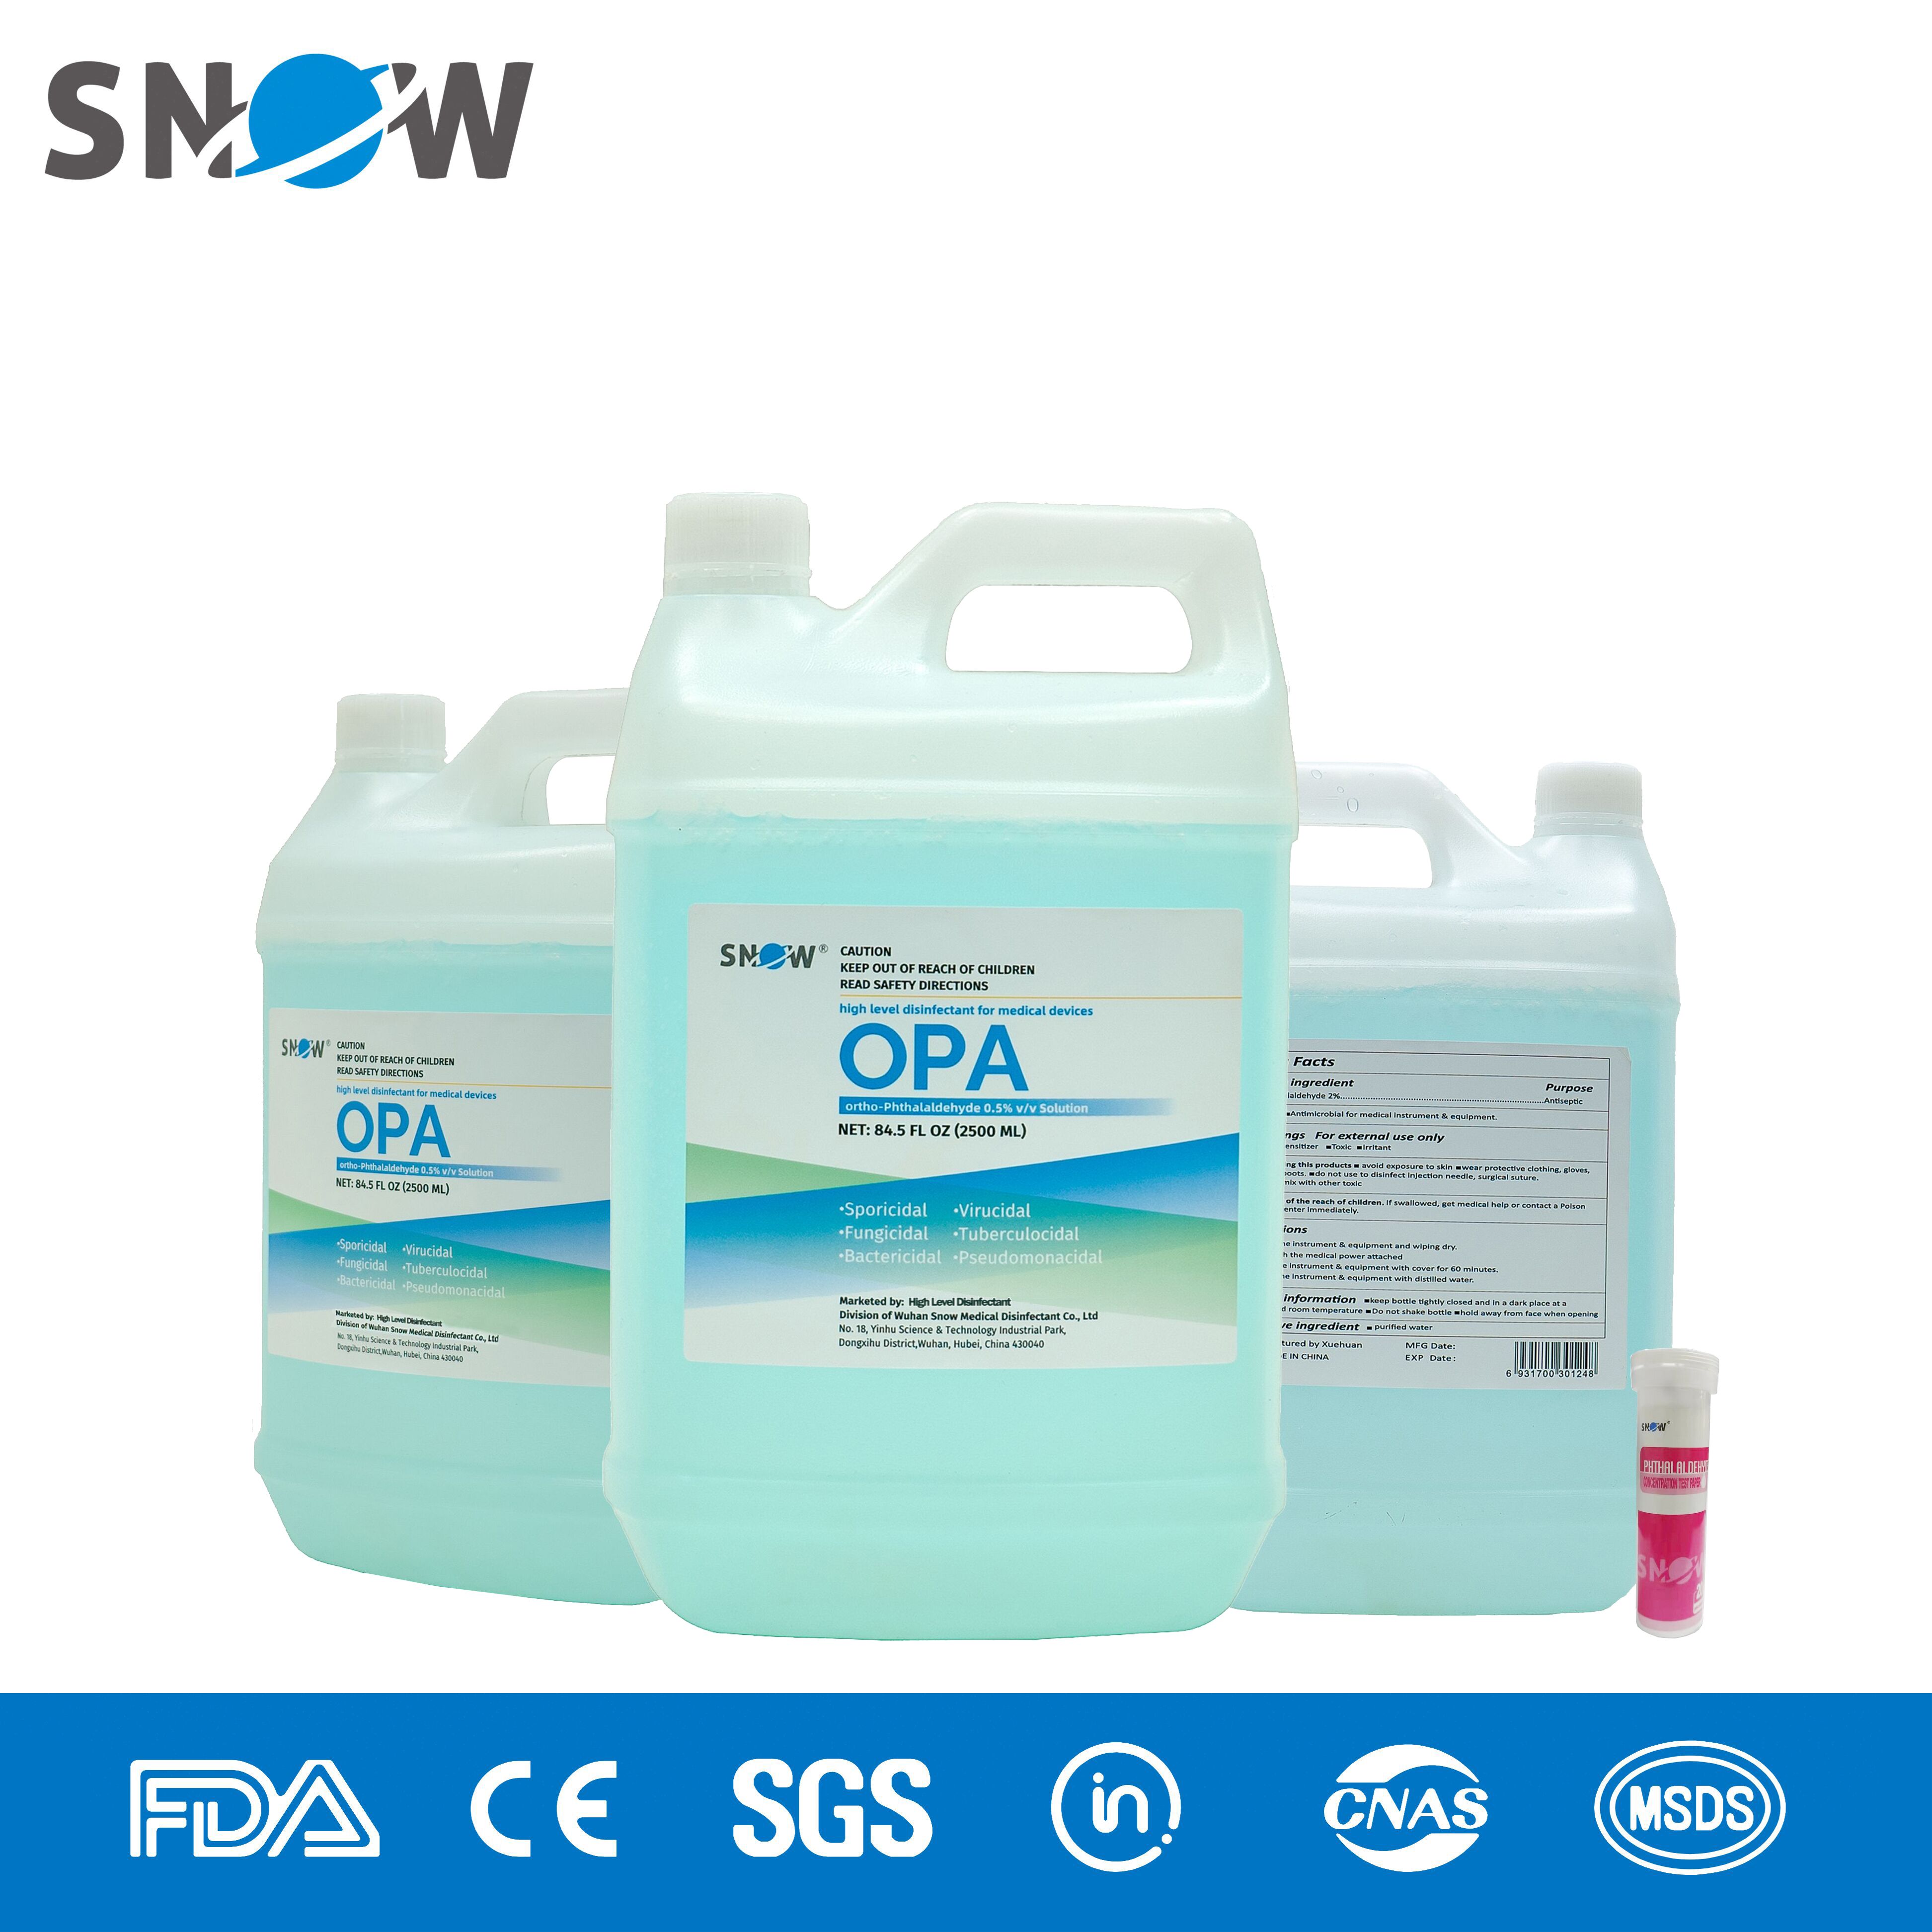 What is high level disinfectant solution OPA?